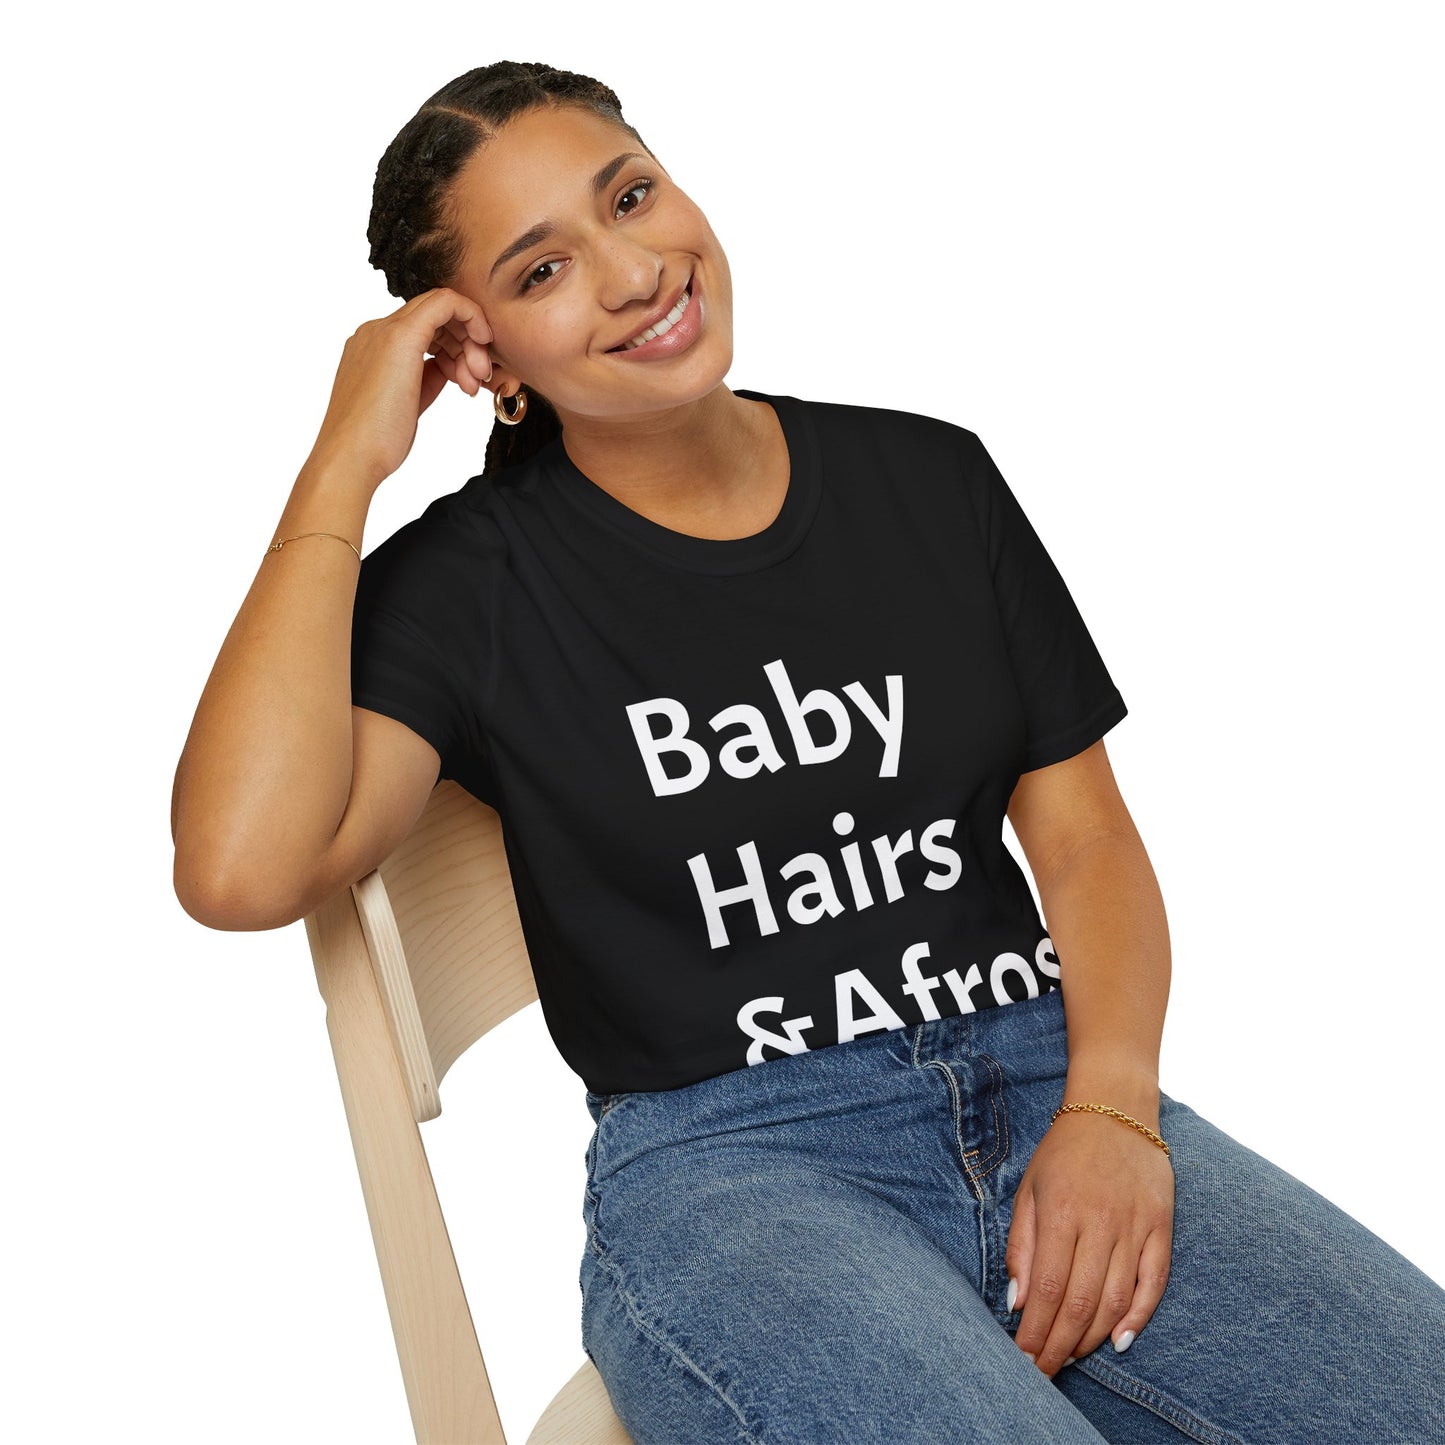 Young girl sitting in a chair wearing a Black T shirt with words "Baby Hairs and Afros " 